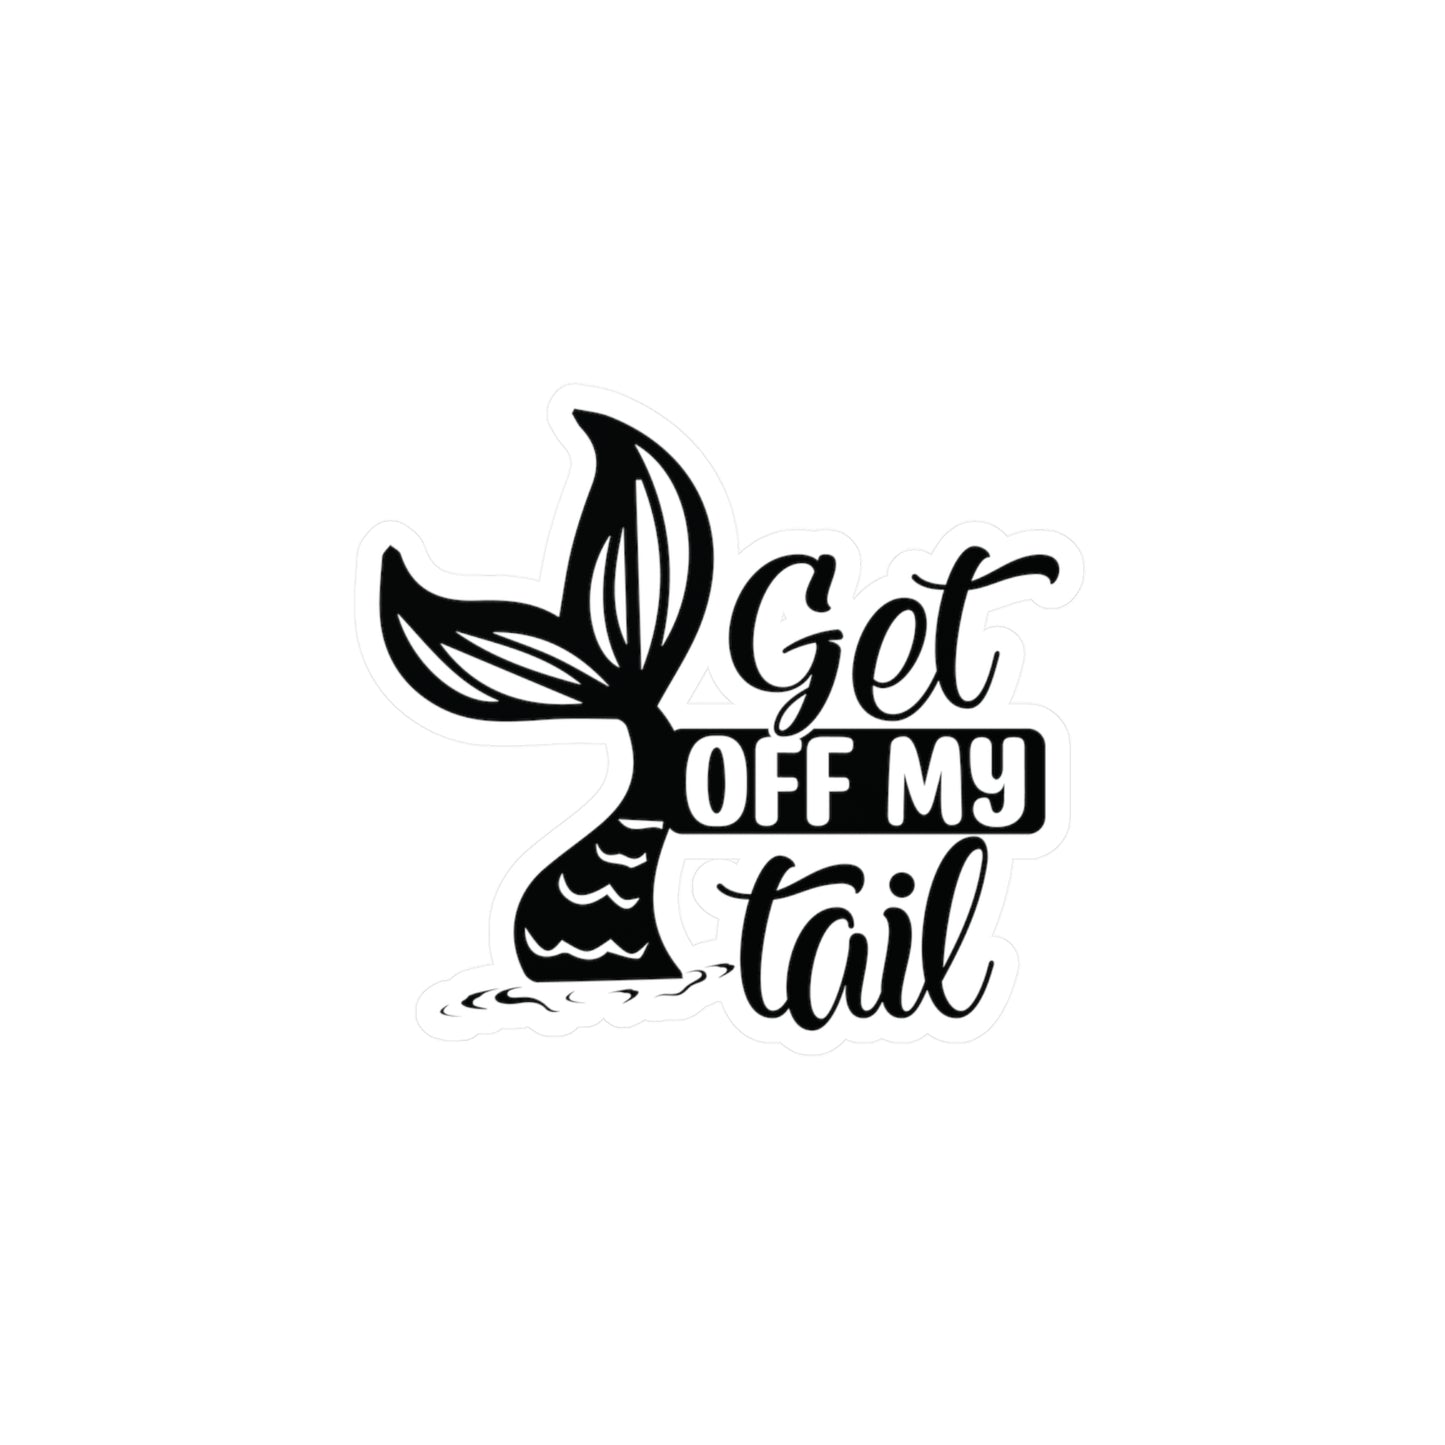 Get Off My Tail Funny Vinyl Car Sticker Decal Sticker Christmas Gift